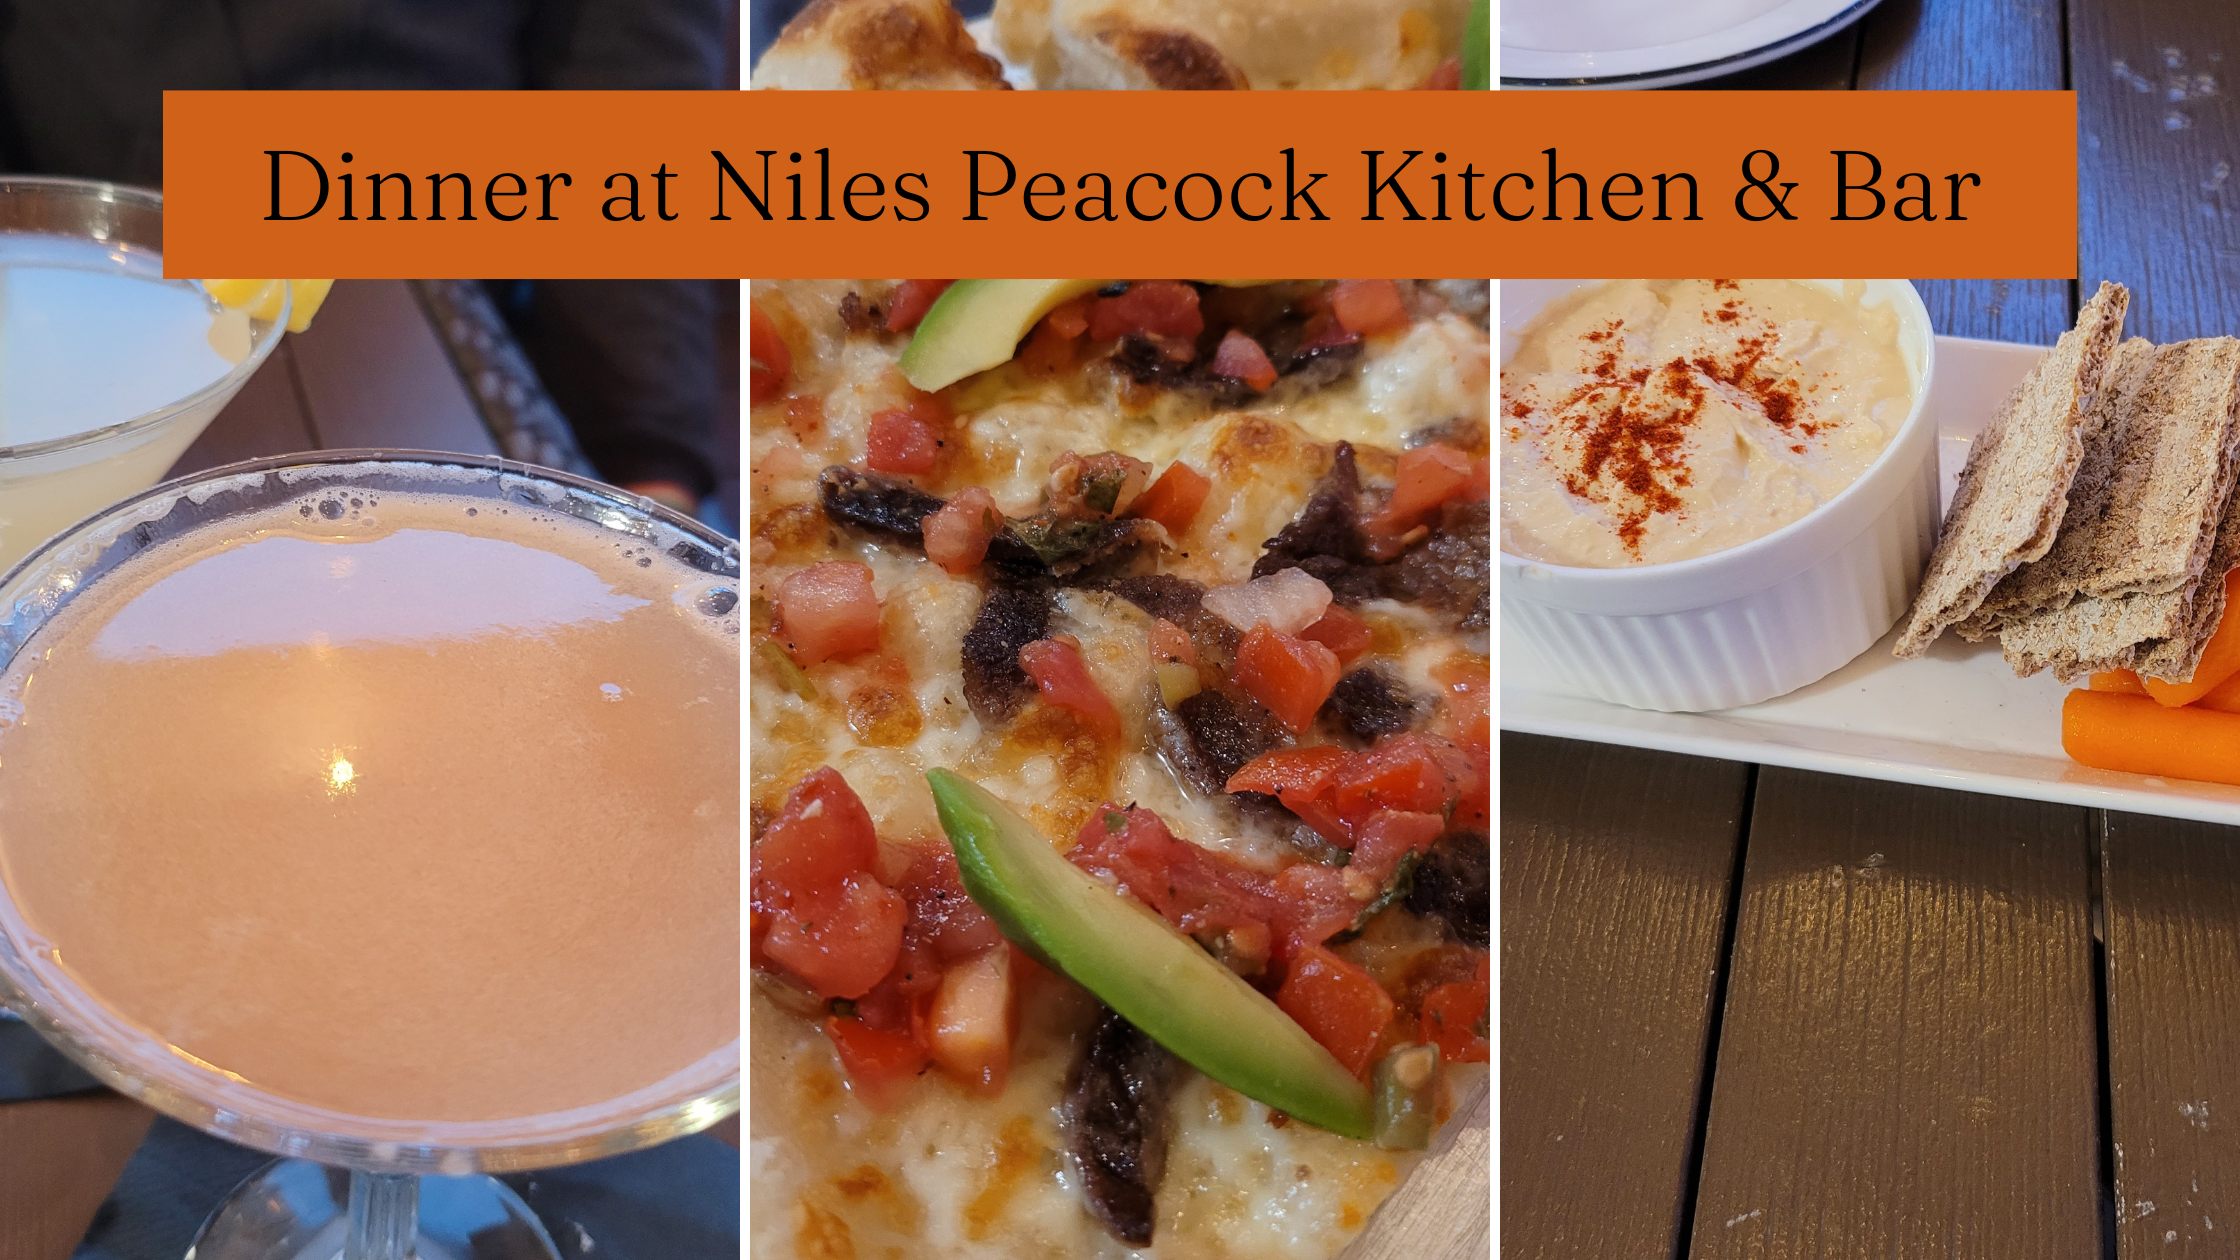 Banner with three food and drink images and text that reads "Dinner at Niles Peacock Kitchen & Bar"